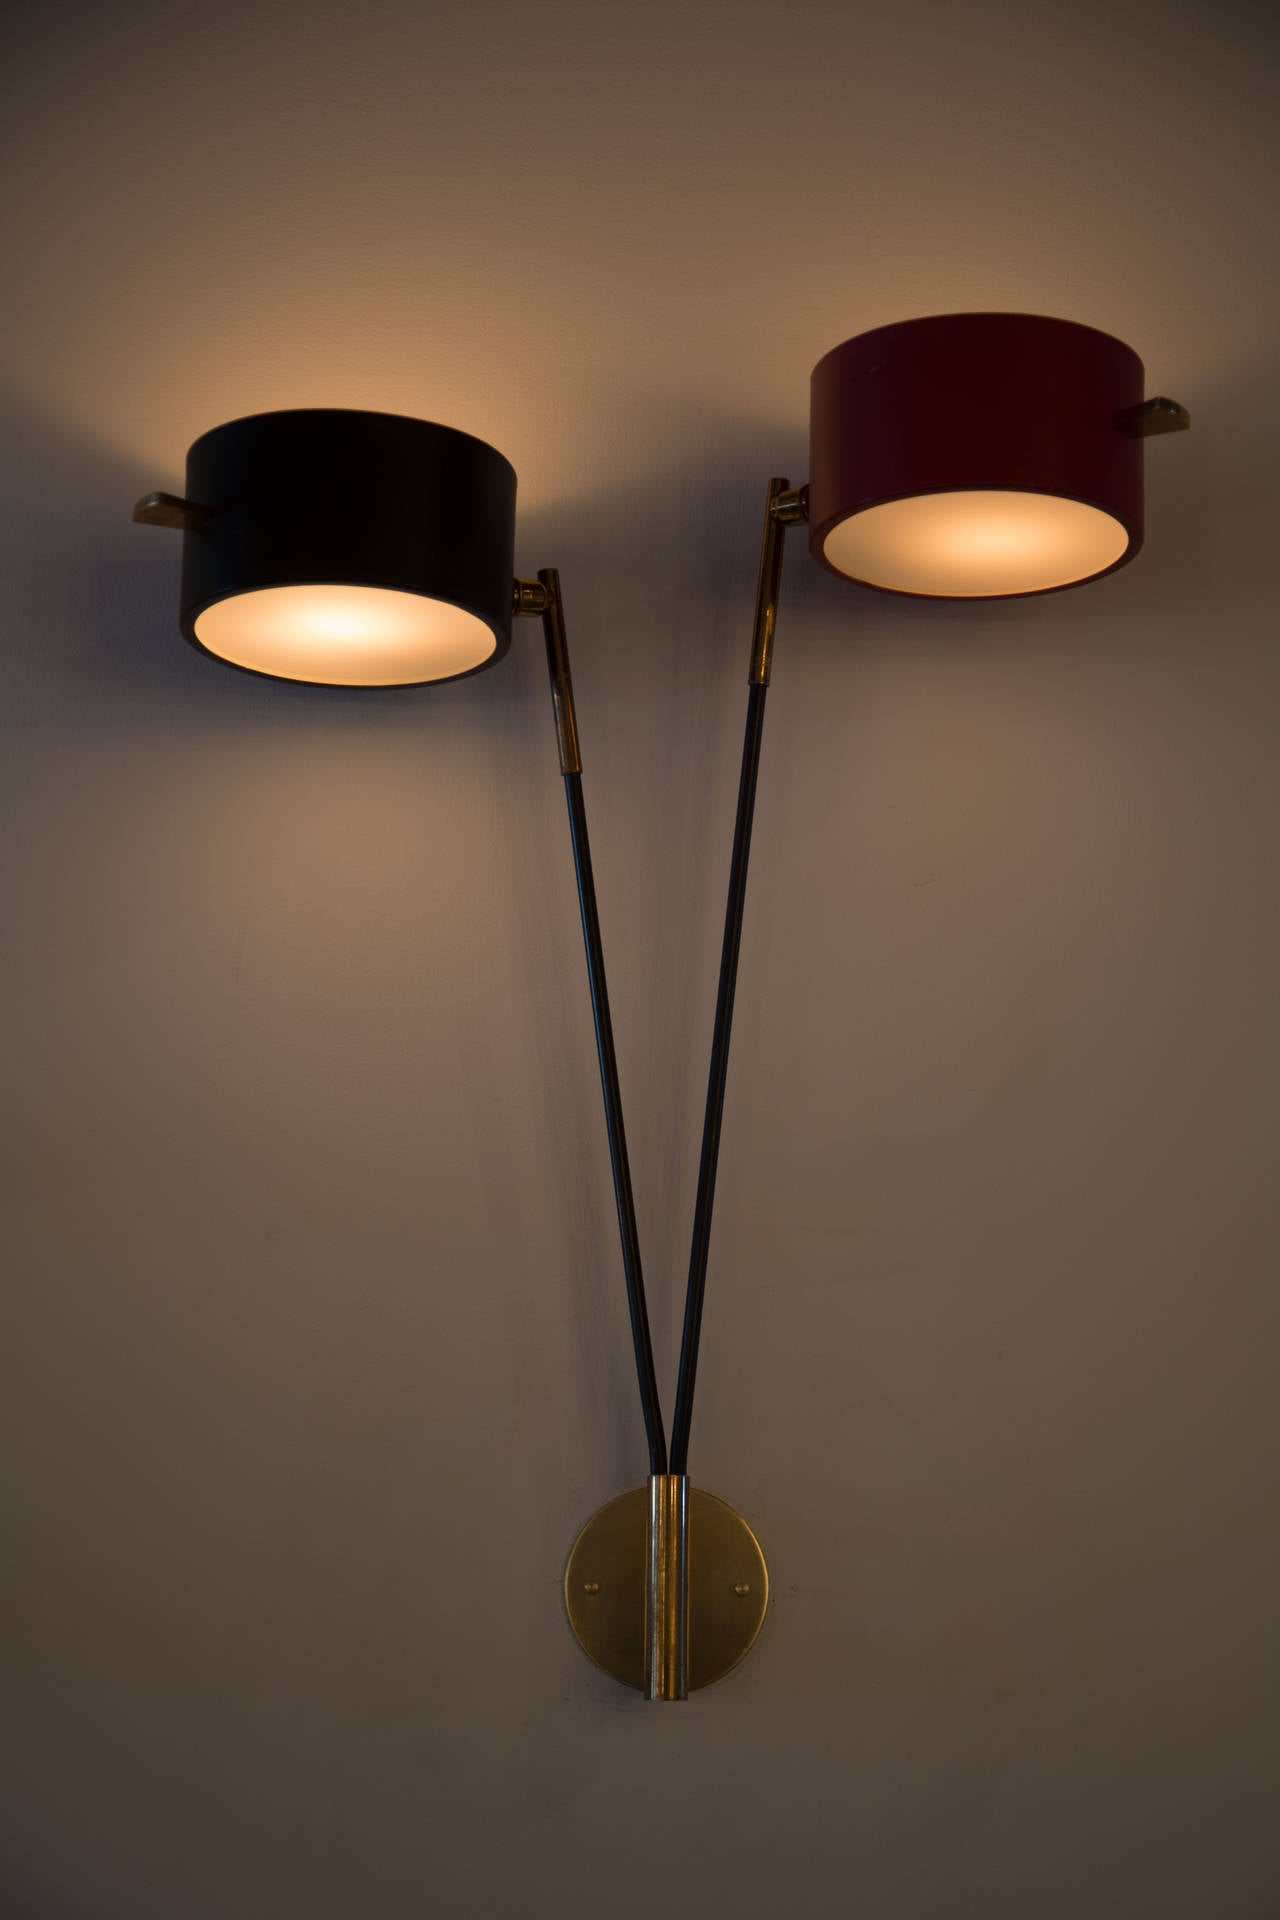 Double shade articulating sconce.